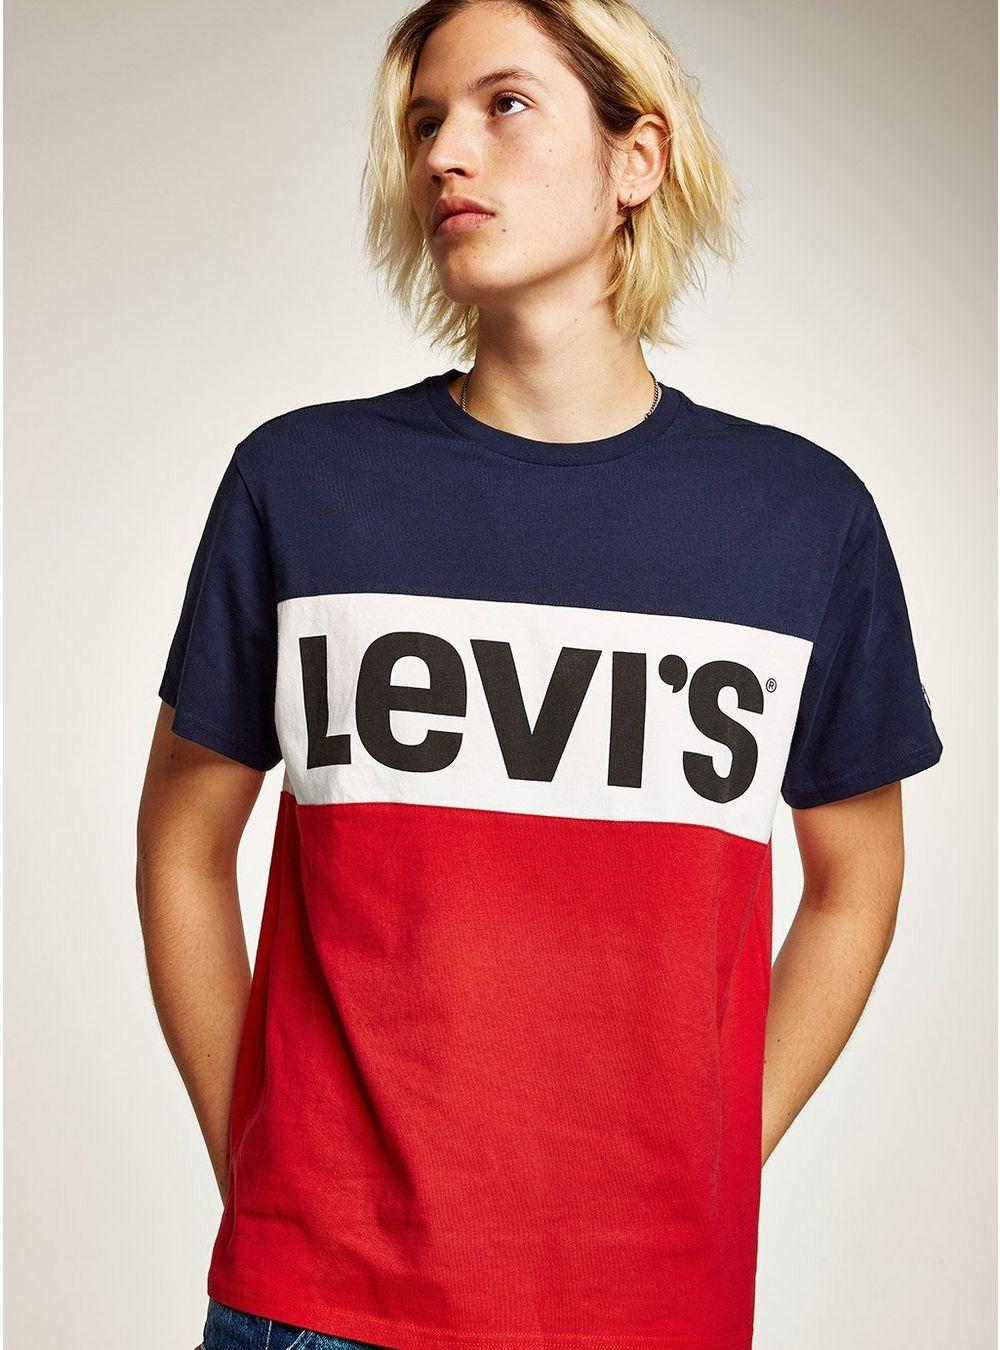 Red and White Fashion Logo - LEVI'S Red, Blue And White Colourblock T-Shirt - Men's T-Shirts ...